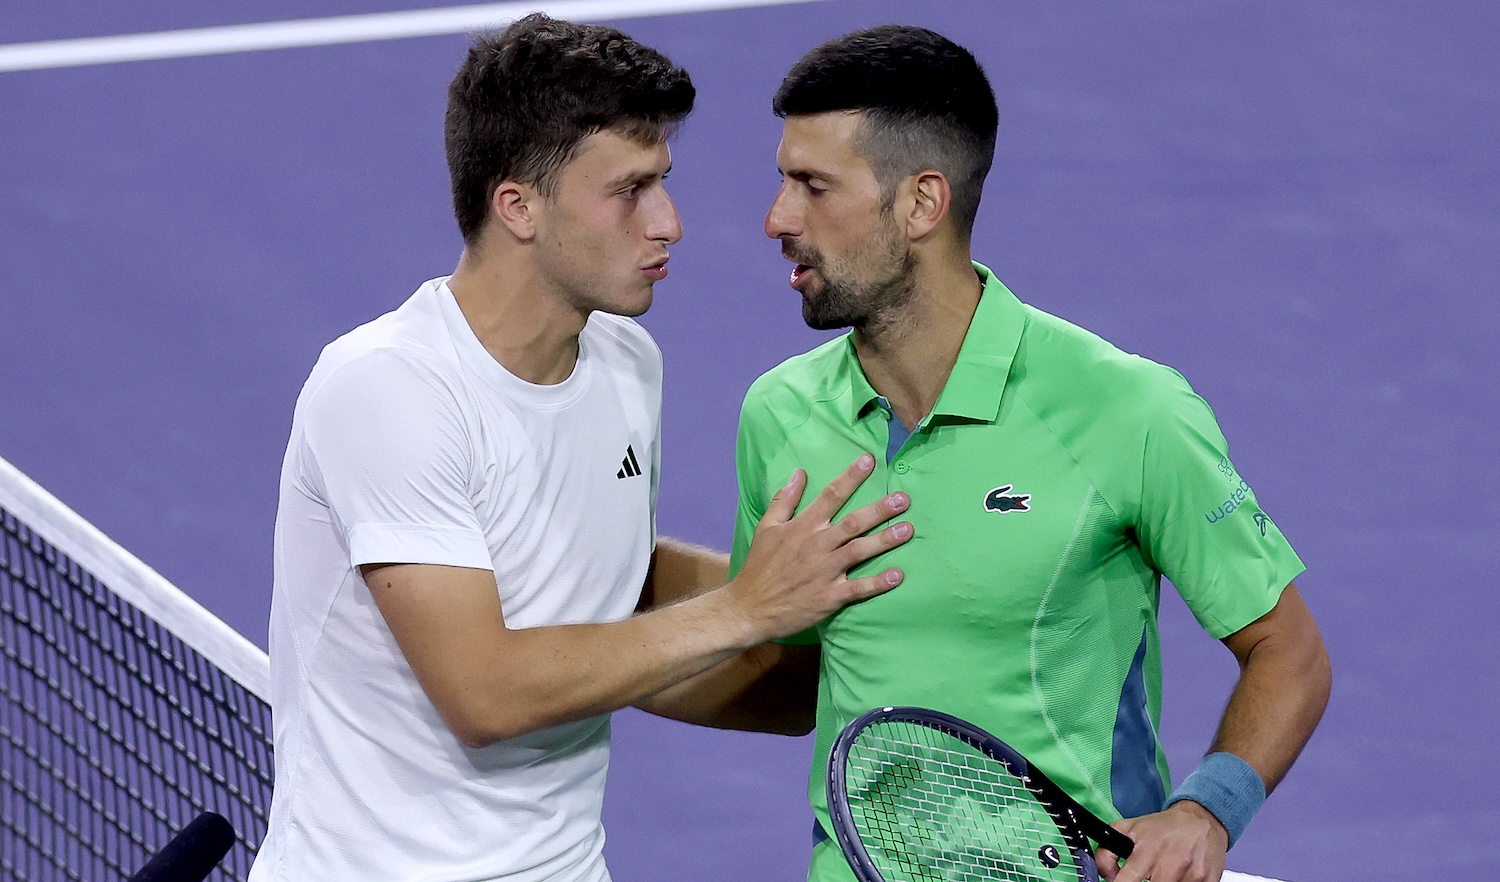 INDIAN WELLS, CALIFORNIA - MARCH 11: Luca Nardi of Italy is congratulated by Novak Djokovic of Serbia after their match during the BNP Paribas Open at Indian Wells Tennis Garden on March 11, 2024 in Indian Wells, California. (Photo by Matthew Stockman/Getty Images)